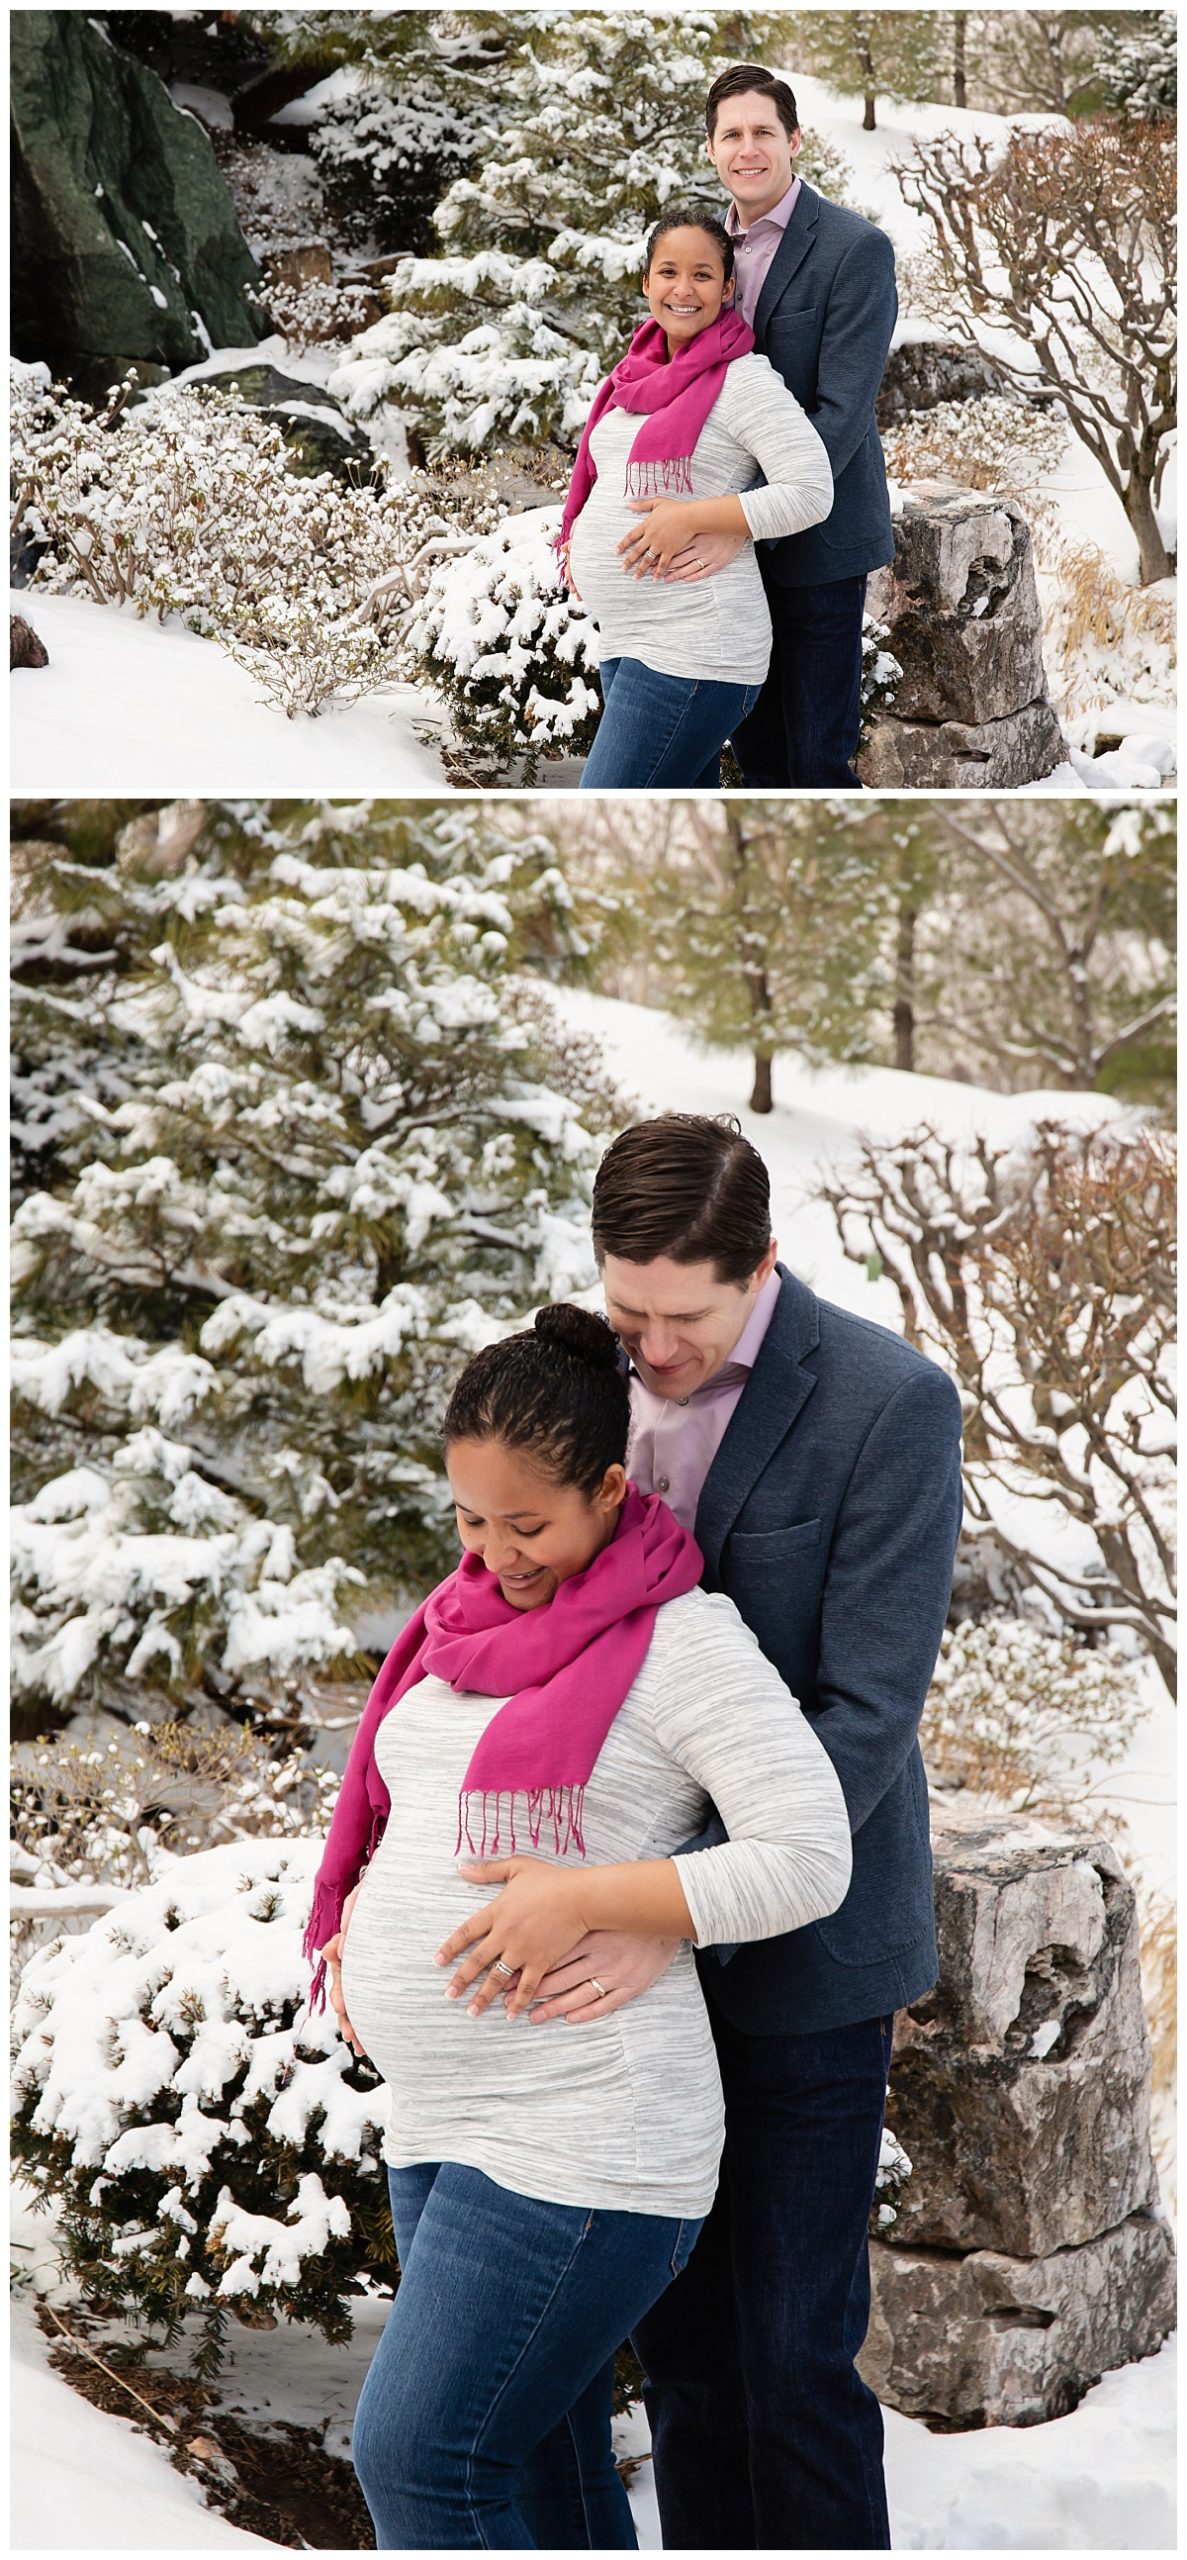 st-louis-maternity-photographer-outdoor-in-the-snow-at-missouri-botanical-gardens-mobot.jpg